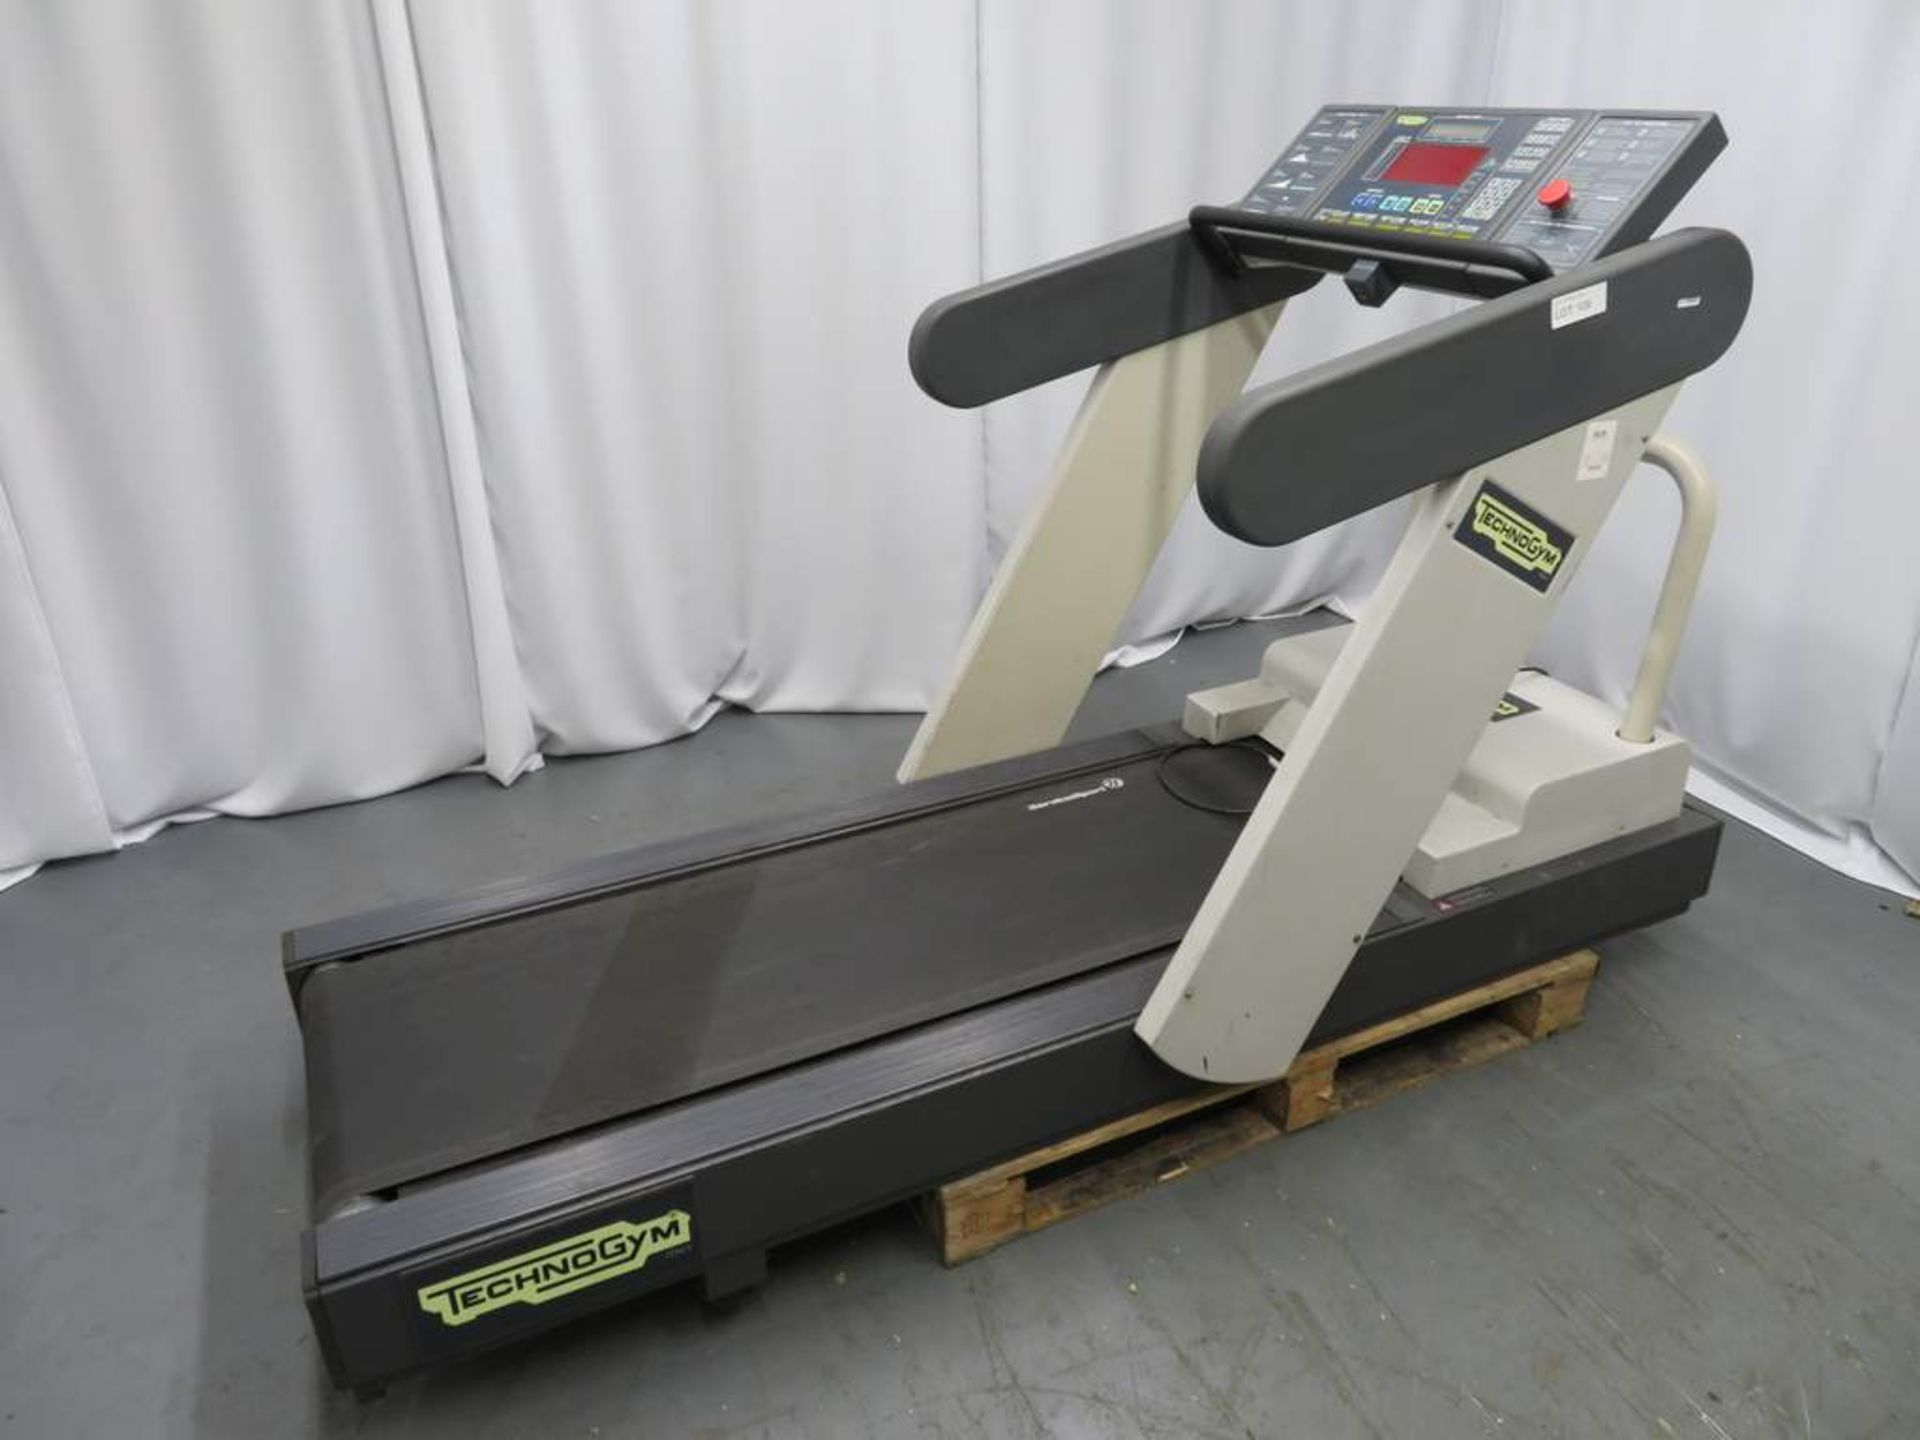 Technogym Runrace Treadmill, 220-240v, LED Display Console. Untested. - Image 2 of 6